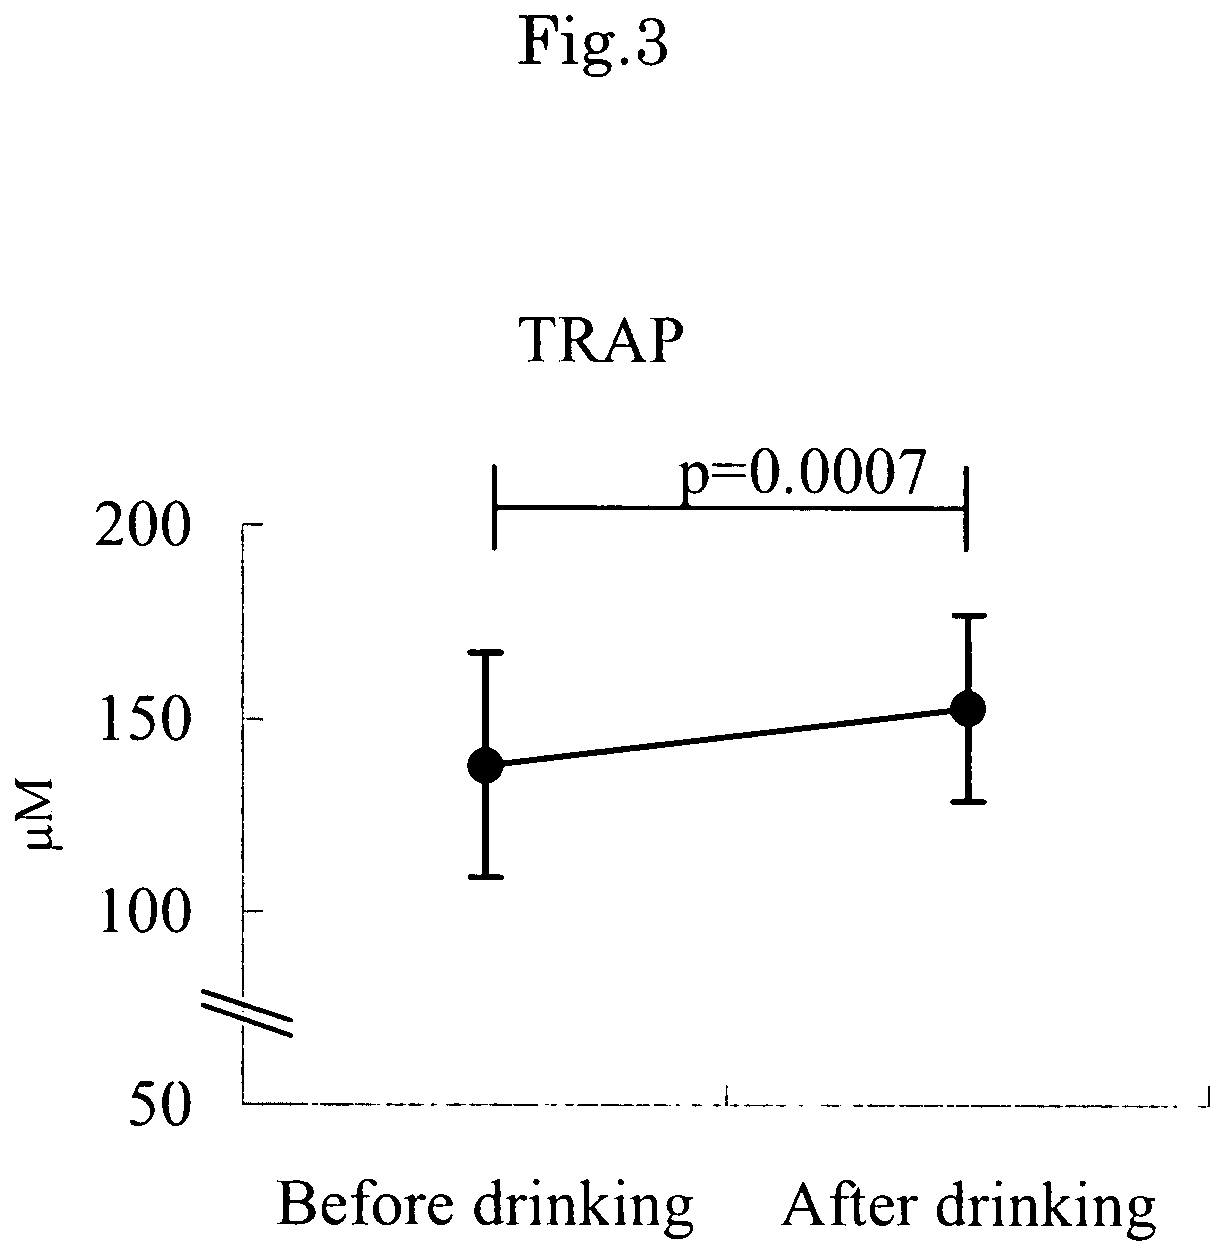 Method of enhancing blood antioxidant activity ingesting a compound in the form of at least one form selected from amongst juice, powder, granule, tablet and capsule, which contains an effective amount of at least one vegetable selected from the group consisting of broccoli, spinach, parsley, komatsuna (Brassicad rapa L.) and japanese radish leaves, and at least one vegetable selected from amongst lettuce, cabbage and celery